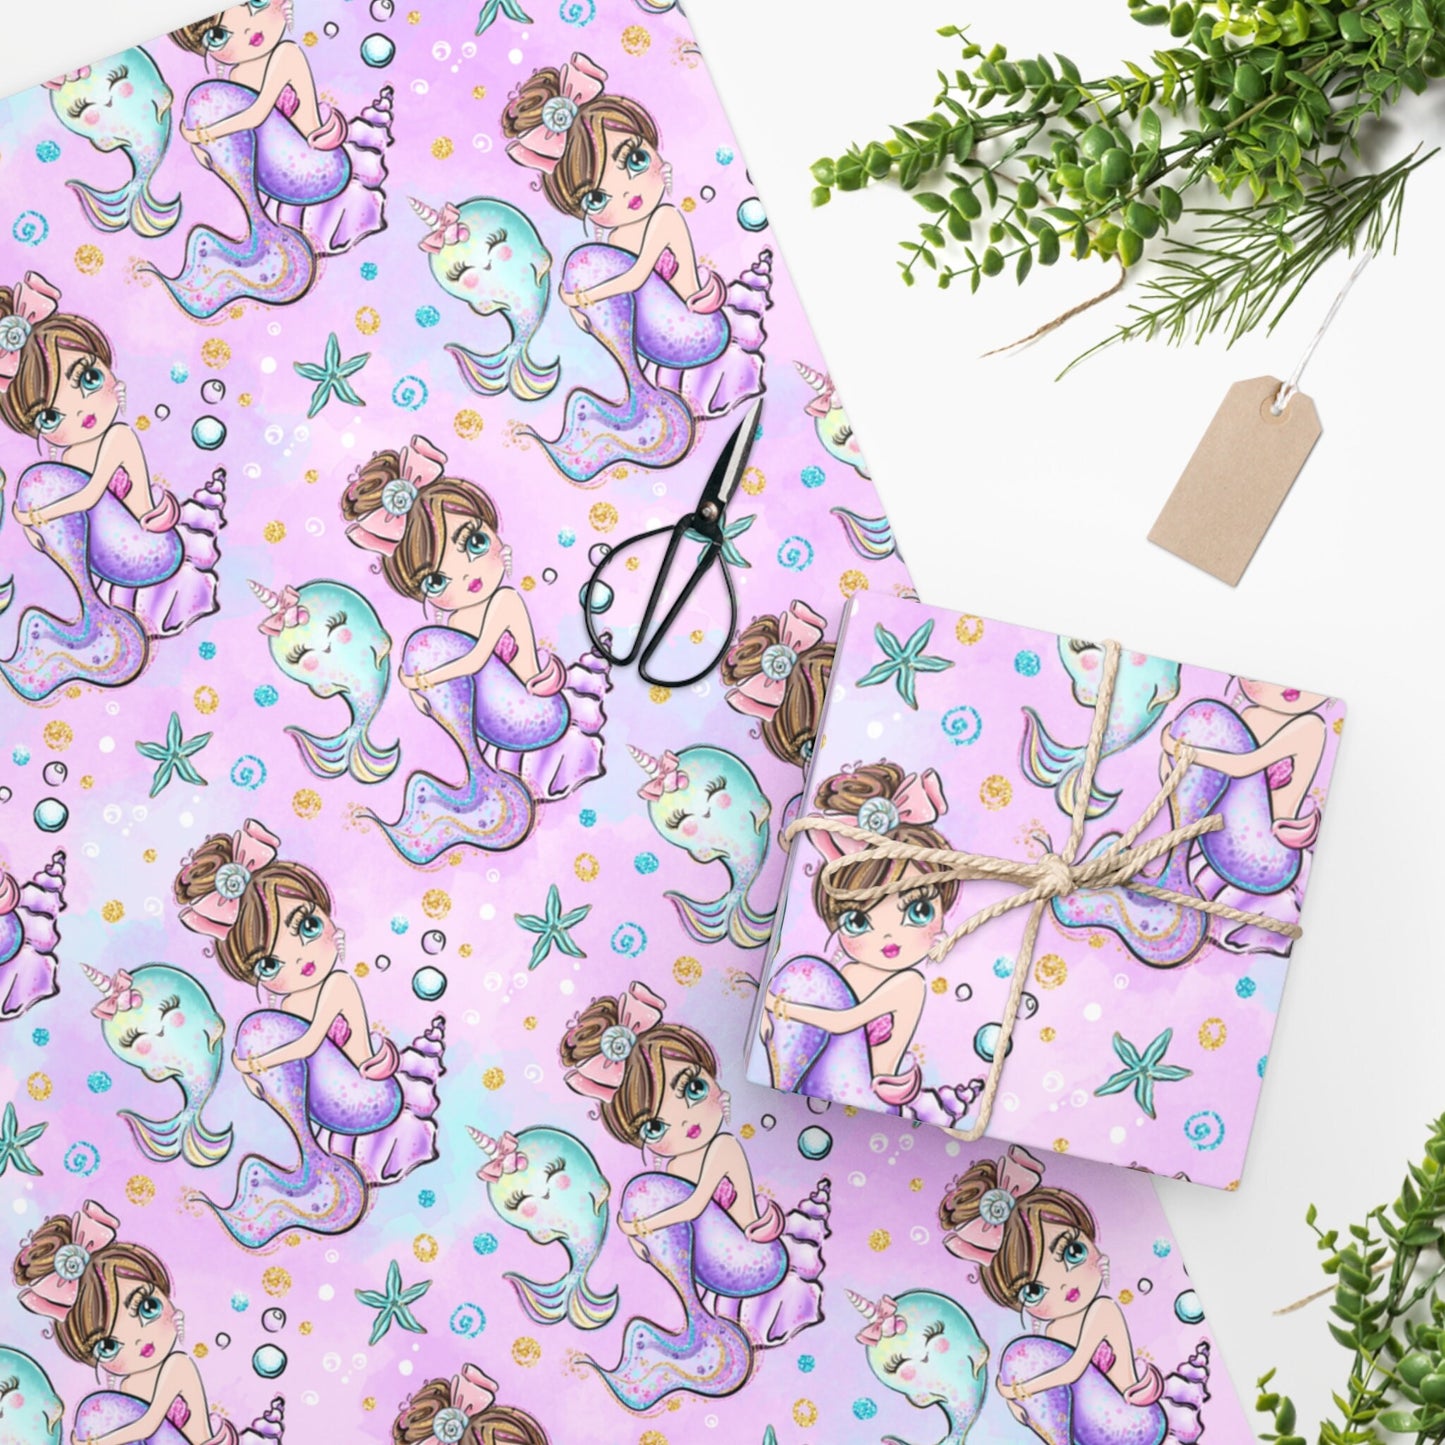 Narwhal Mermaid Birthday Gift Wrapping Paper, Pastel Mermaid Baby Shower Wrap Paper, Narwhal Unicorn of the Sea Party Seashell Pattern Paper